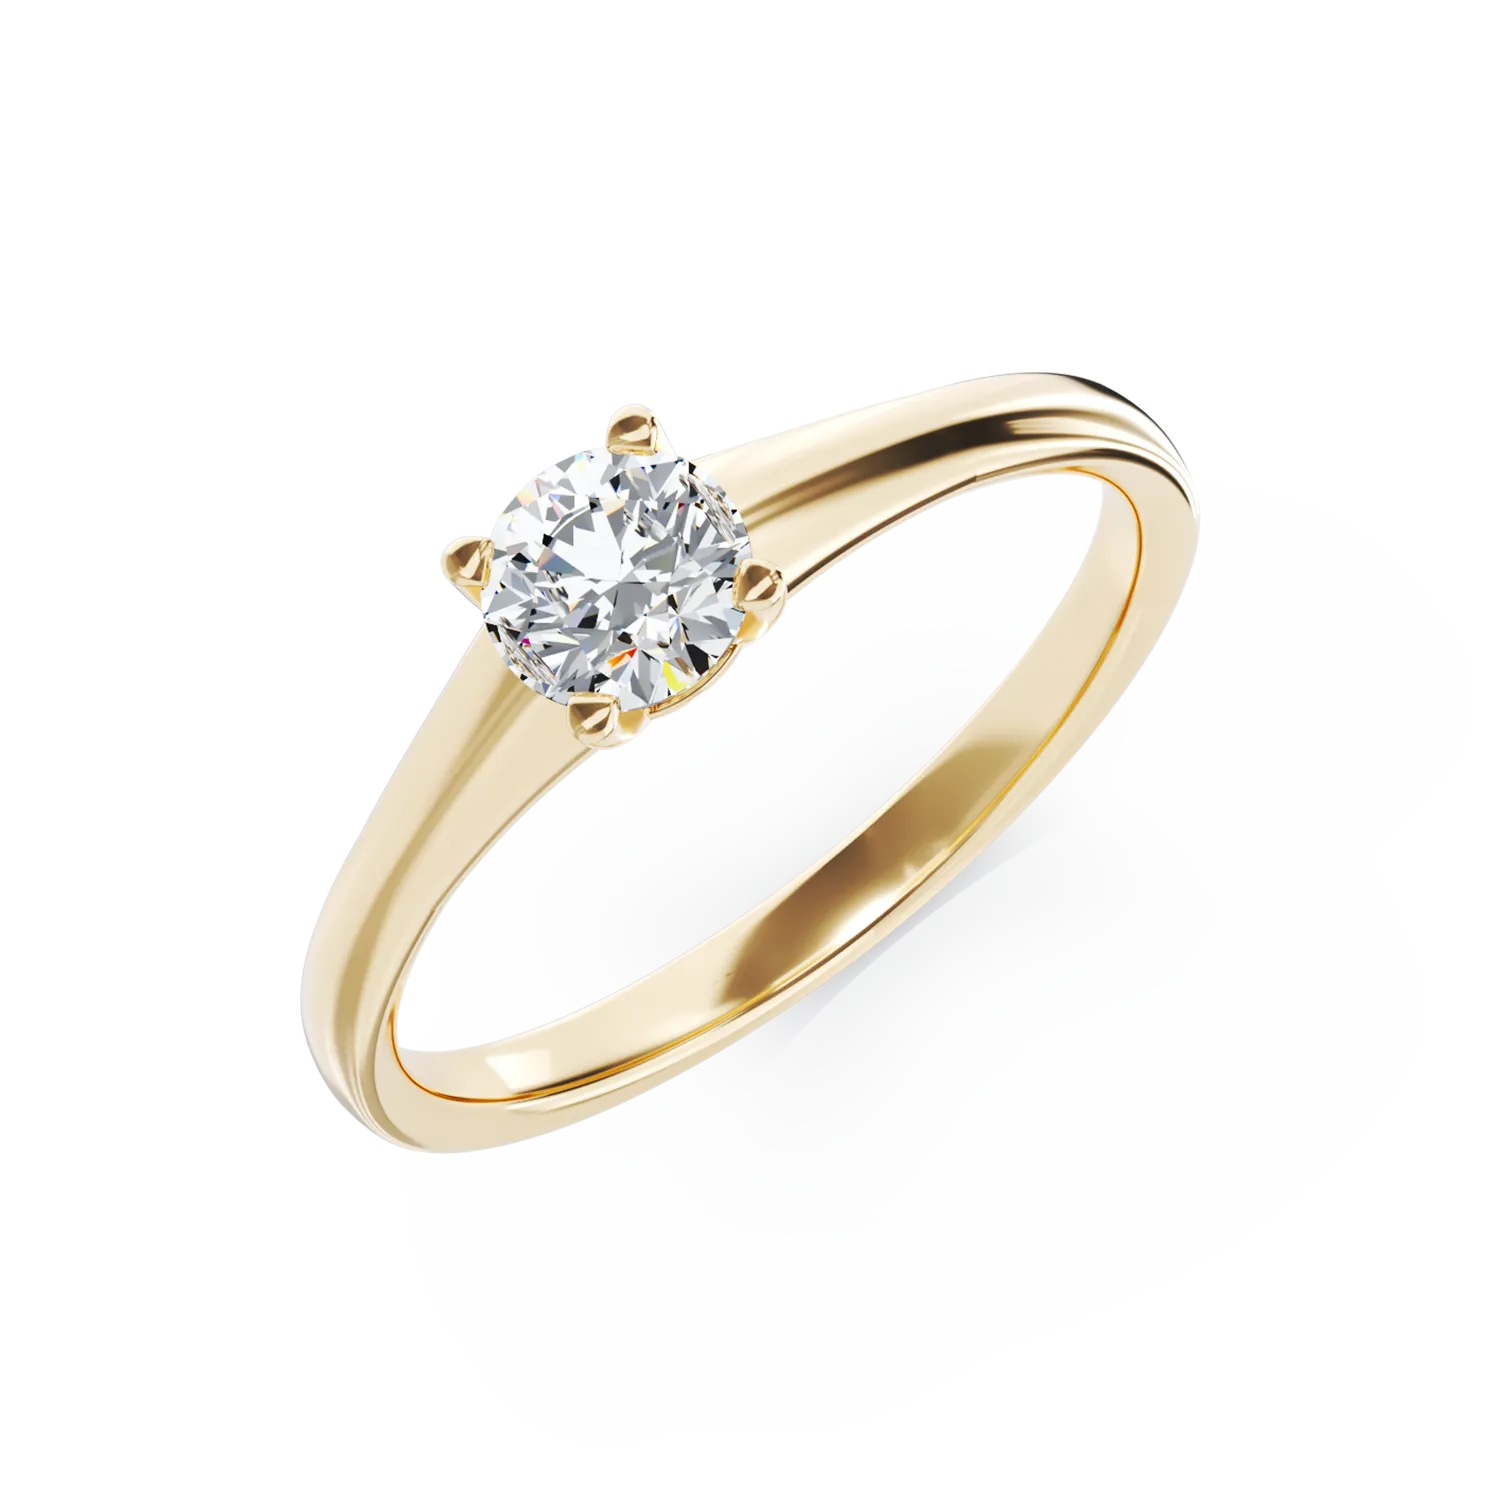 18K yellow gold engagement ring with 0.41ct solitaire diamond